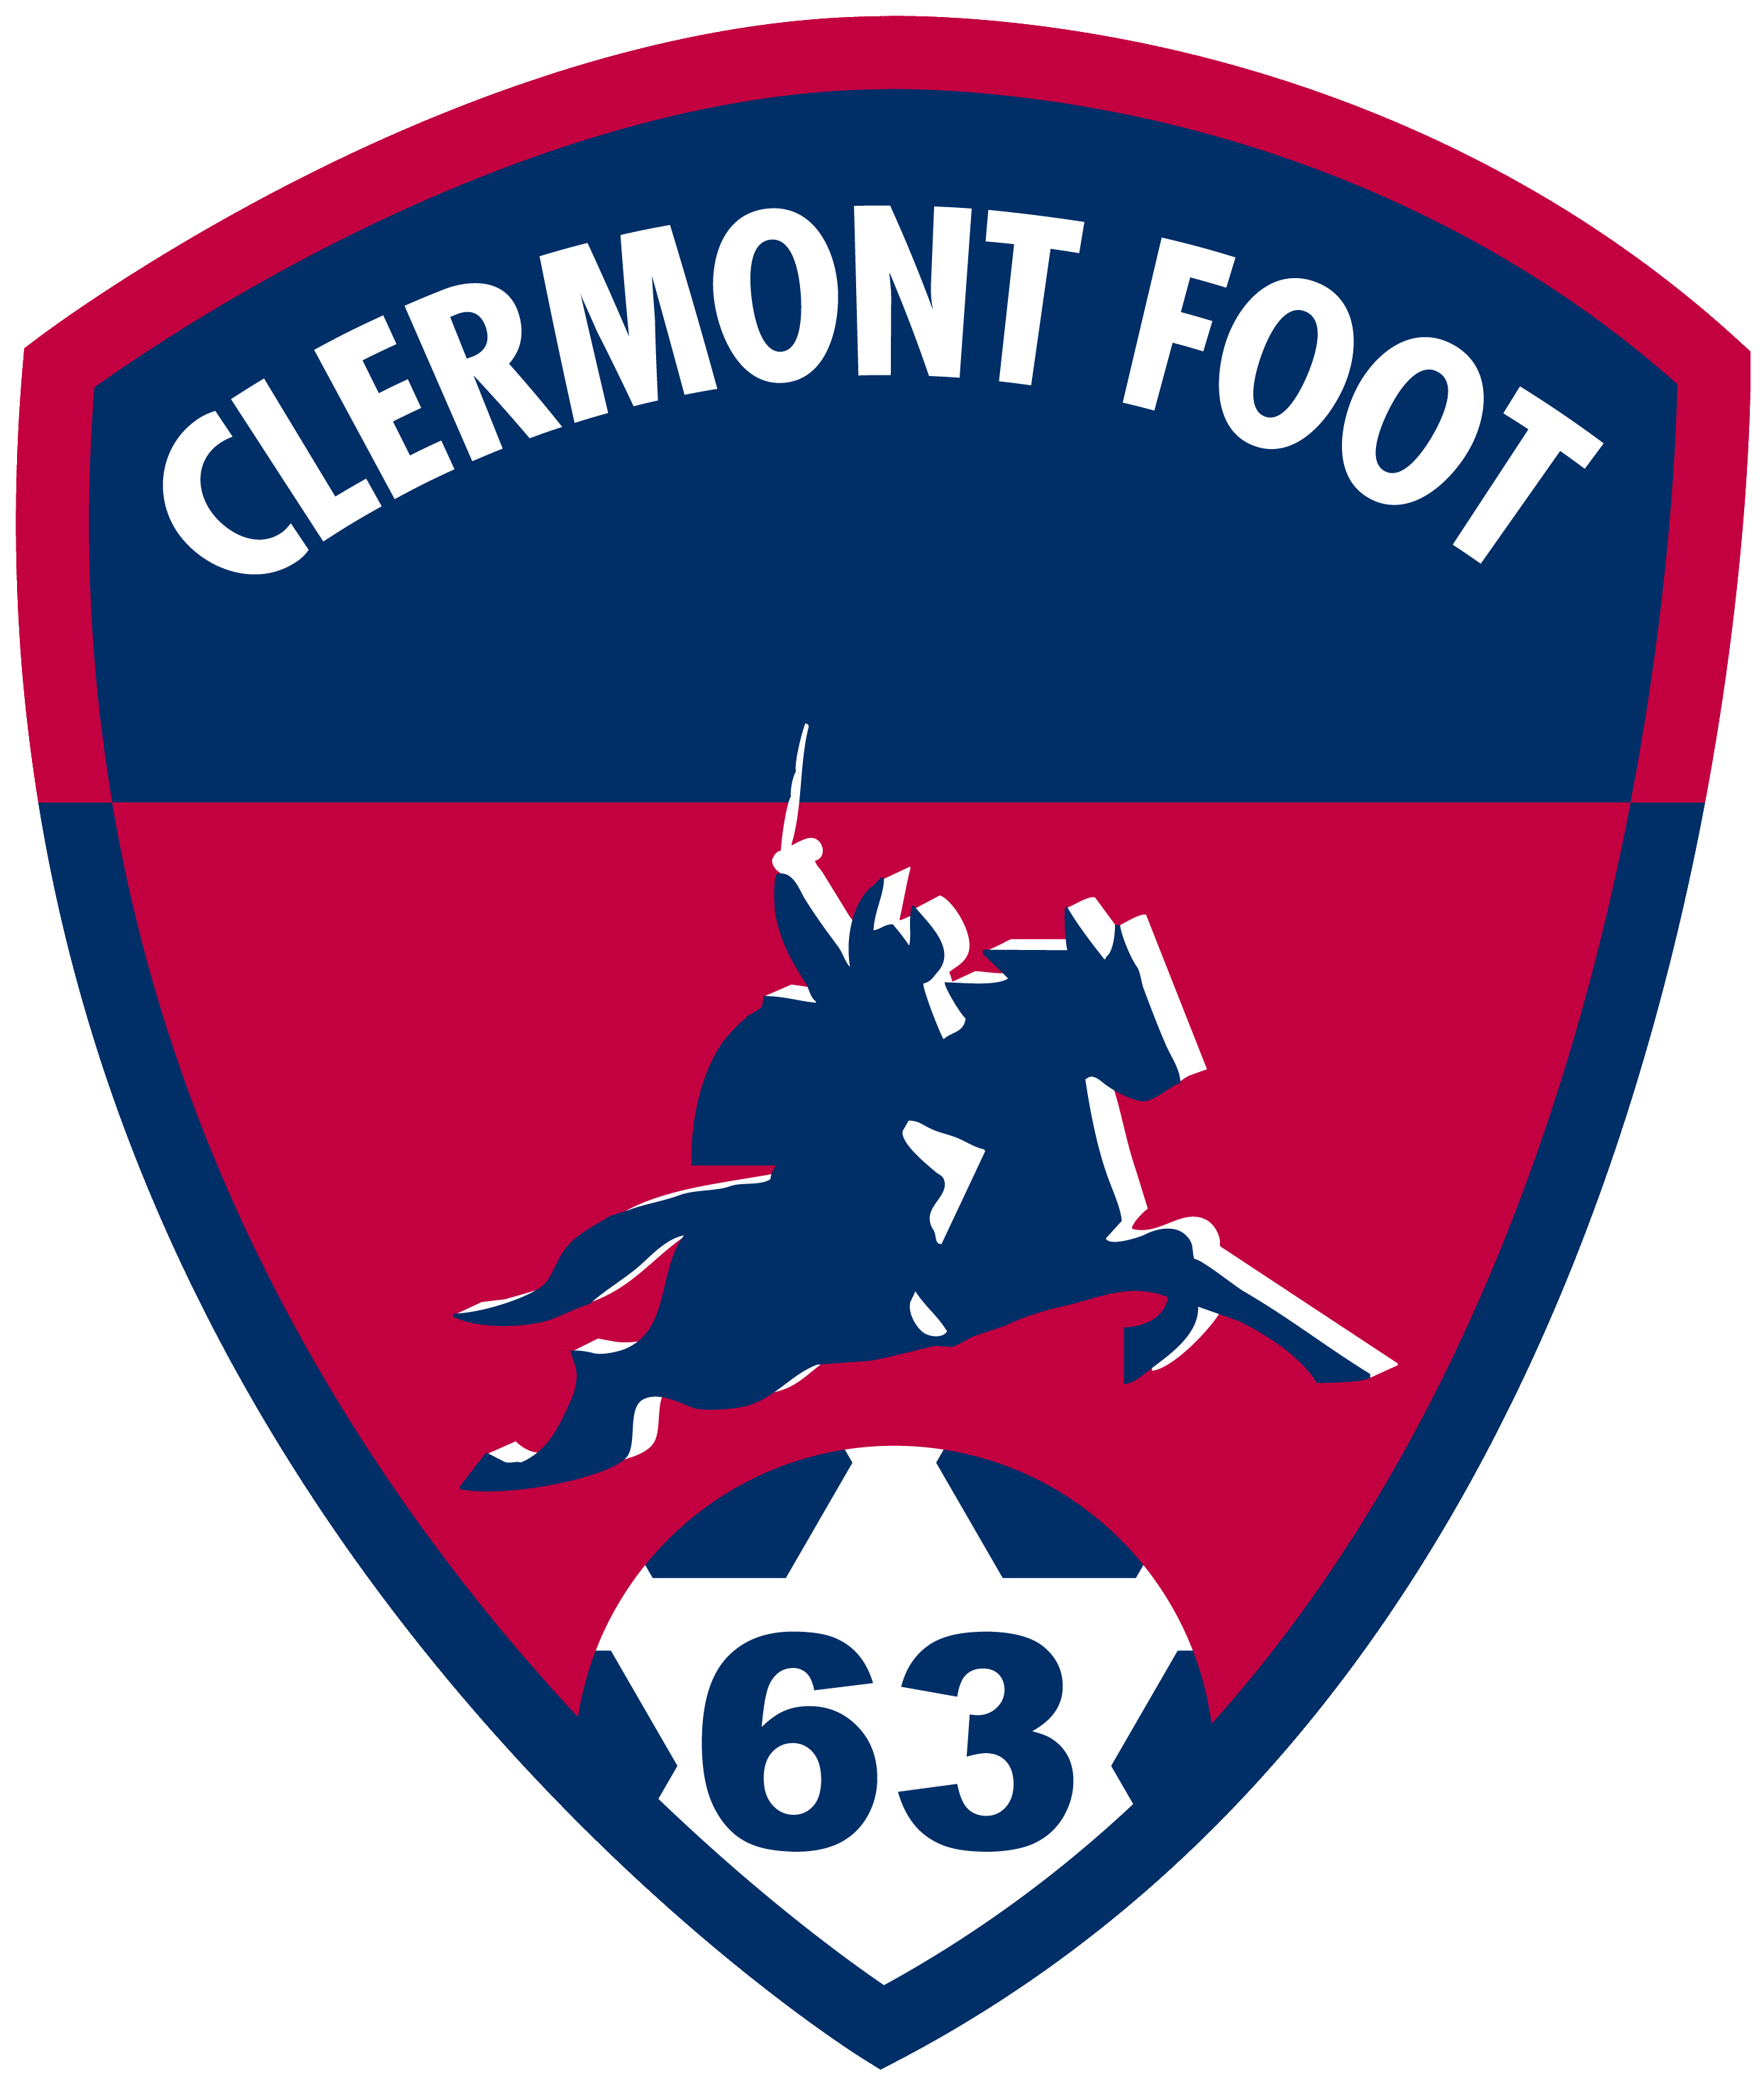 Clermont Foot vs PSG: The Ligue 1 Champions to run riot in this opening-day fixture